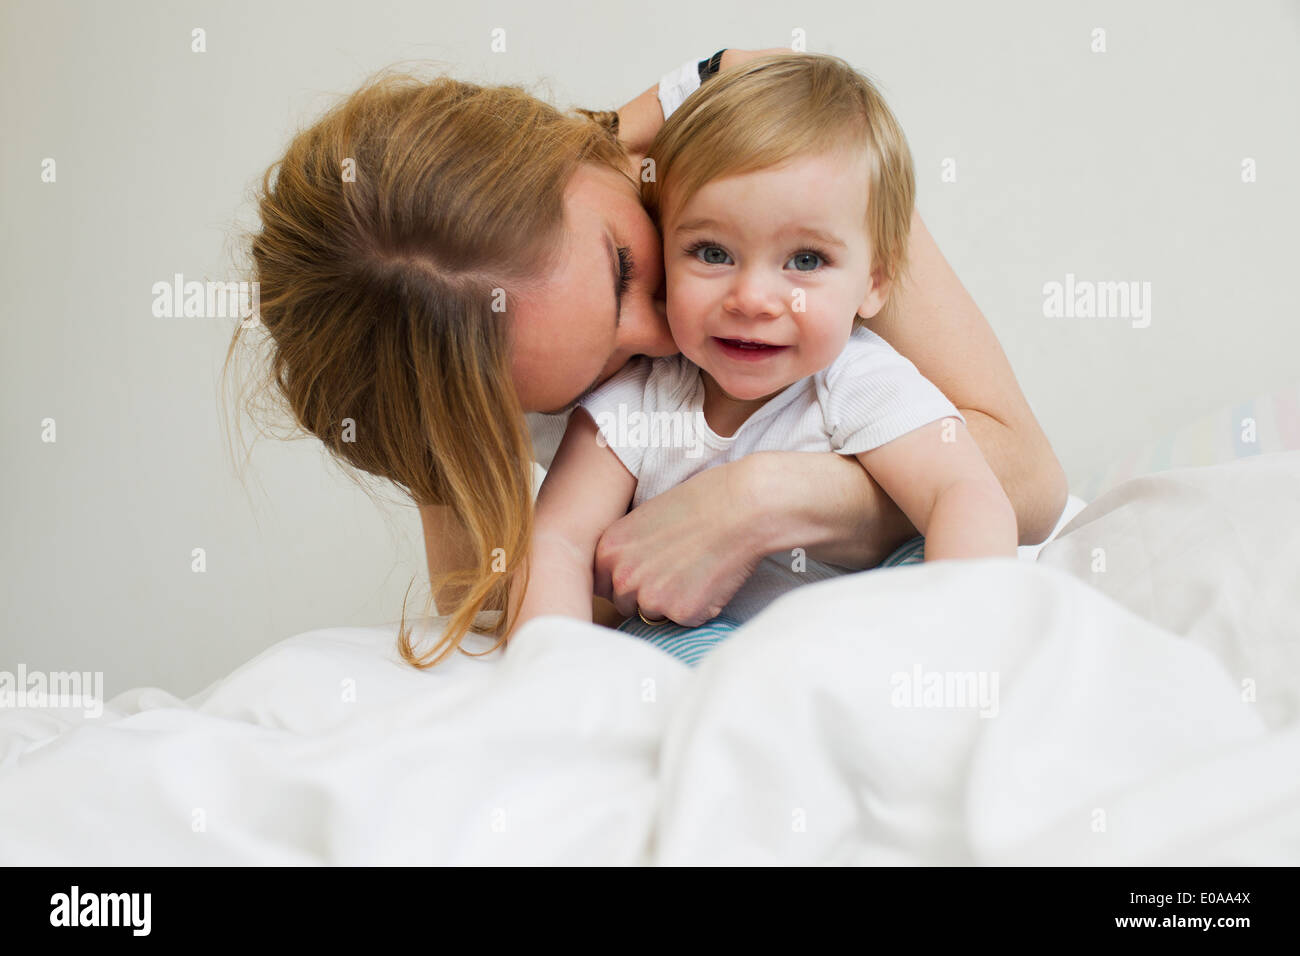 Portrait of mid adult woman hugging her an baby girl Banque D'Images